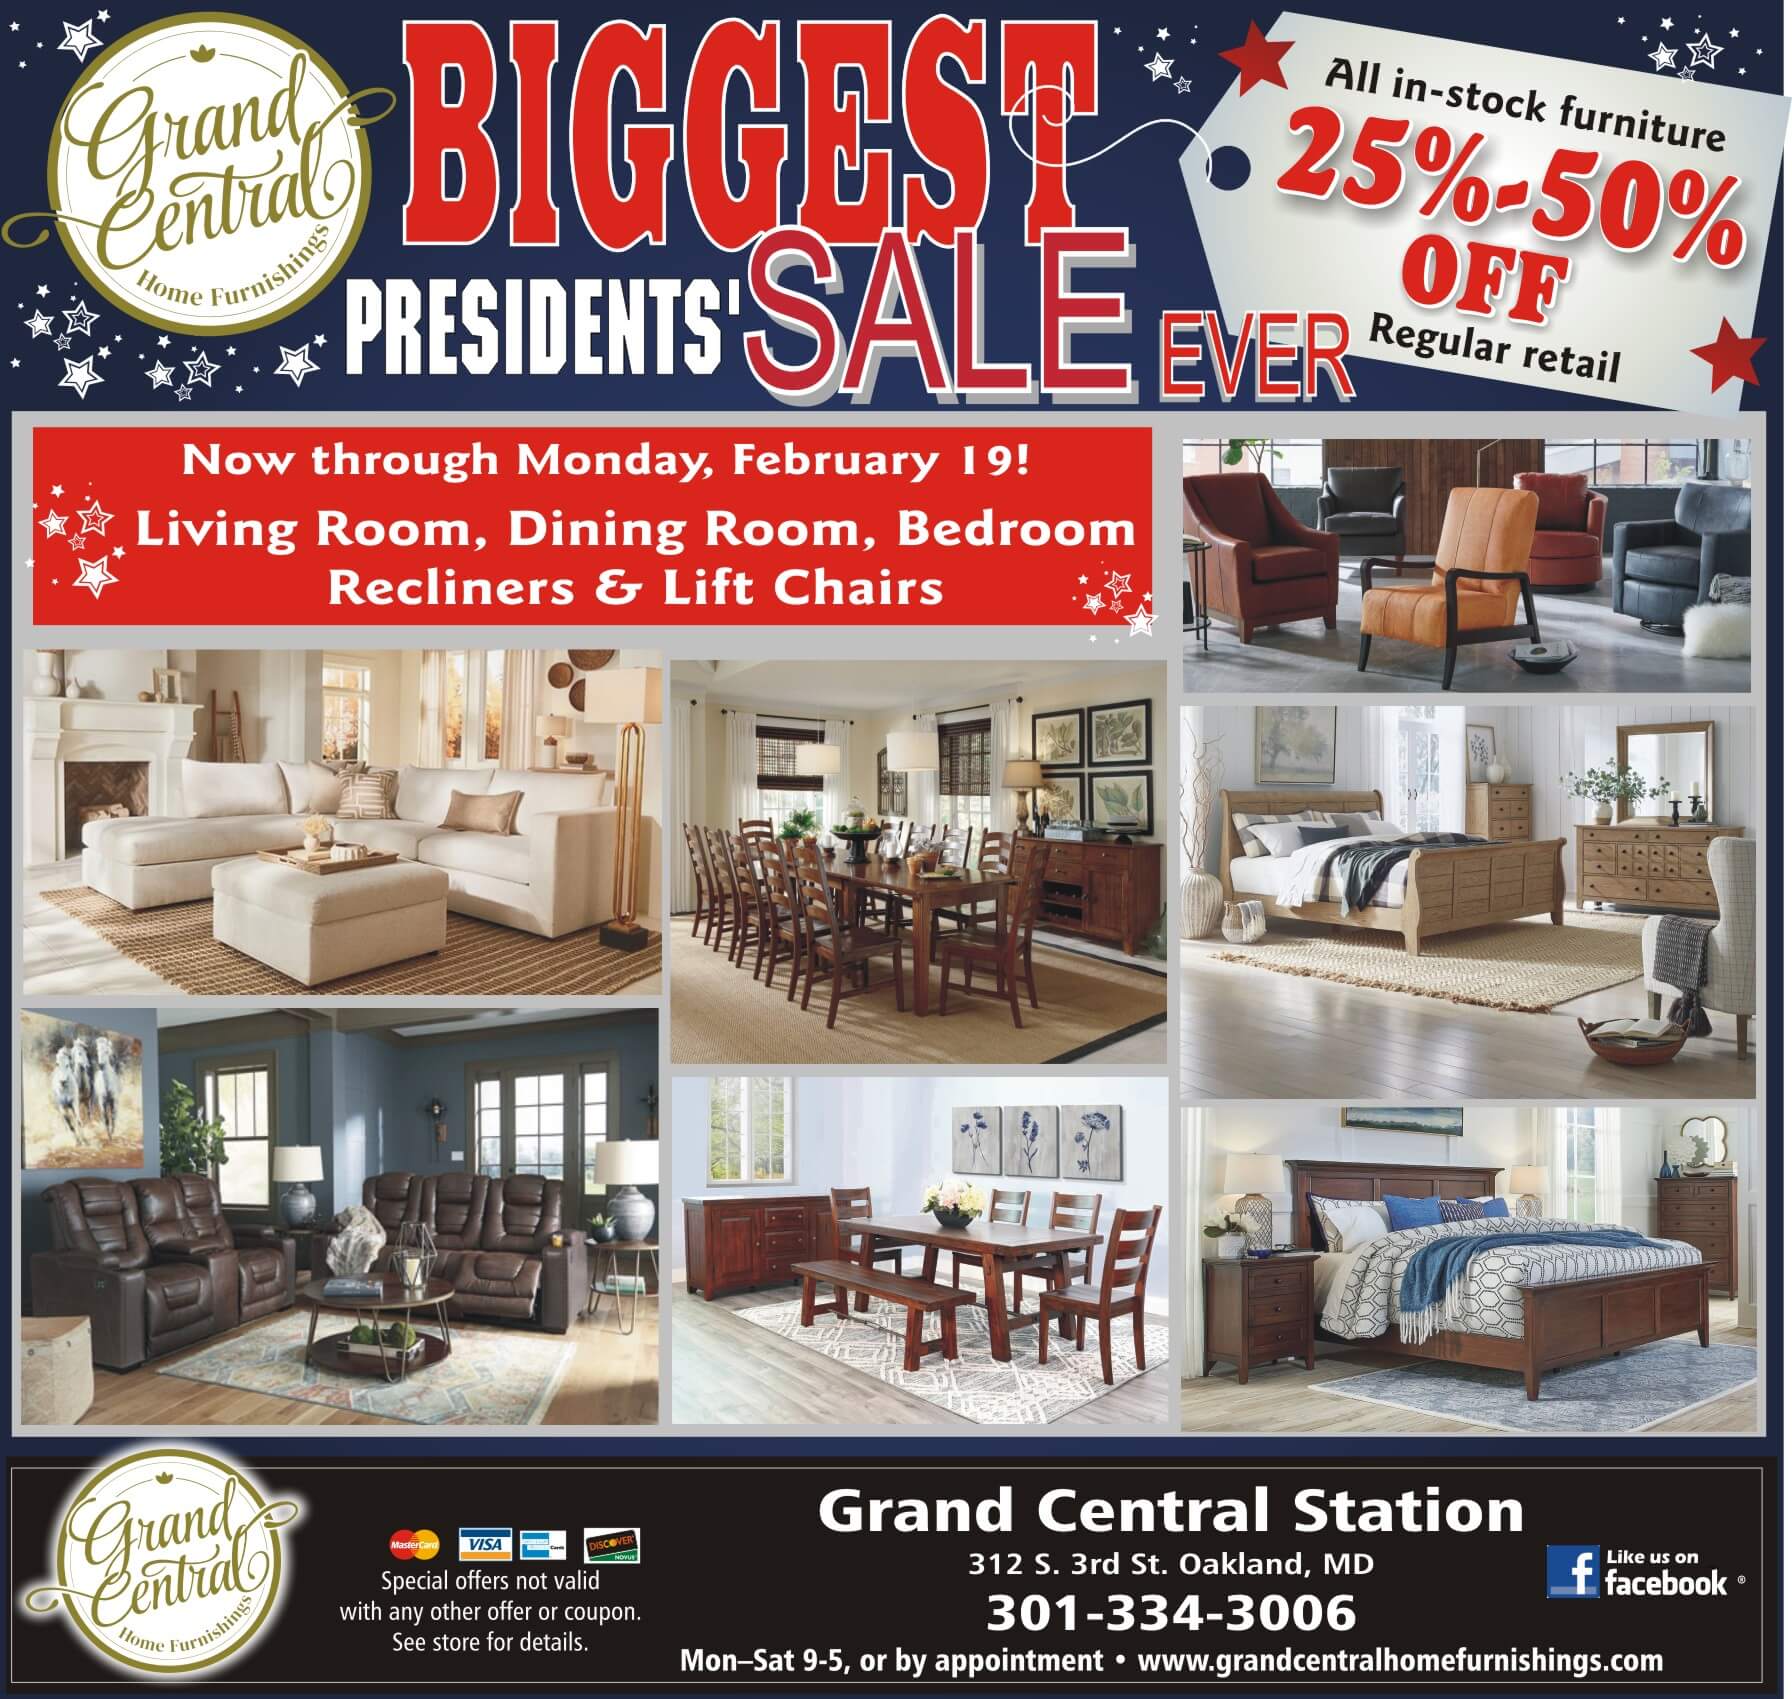 Grand Central Home Furnishings- Biggest Presidents' Sale Ever at Deep Creek Lake, MD